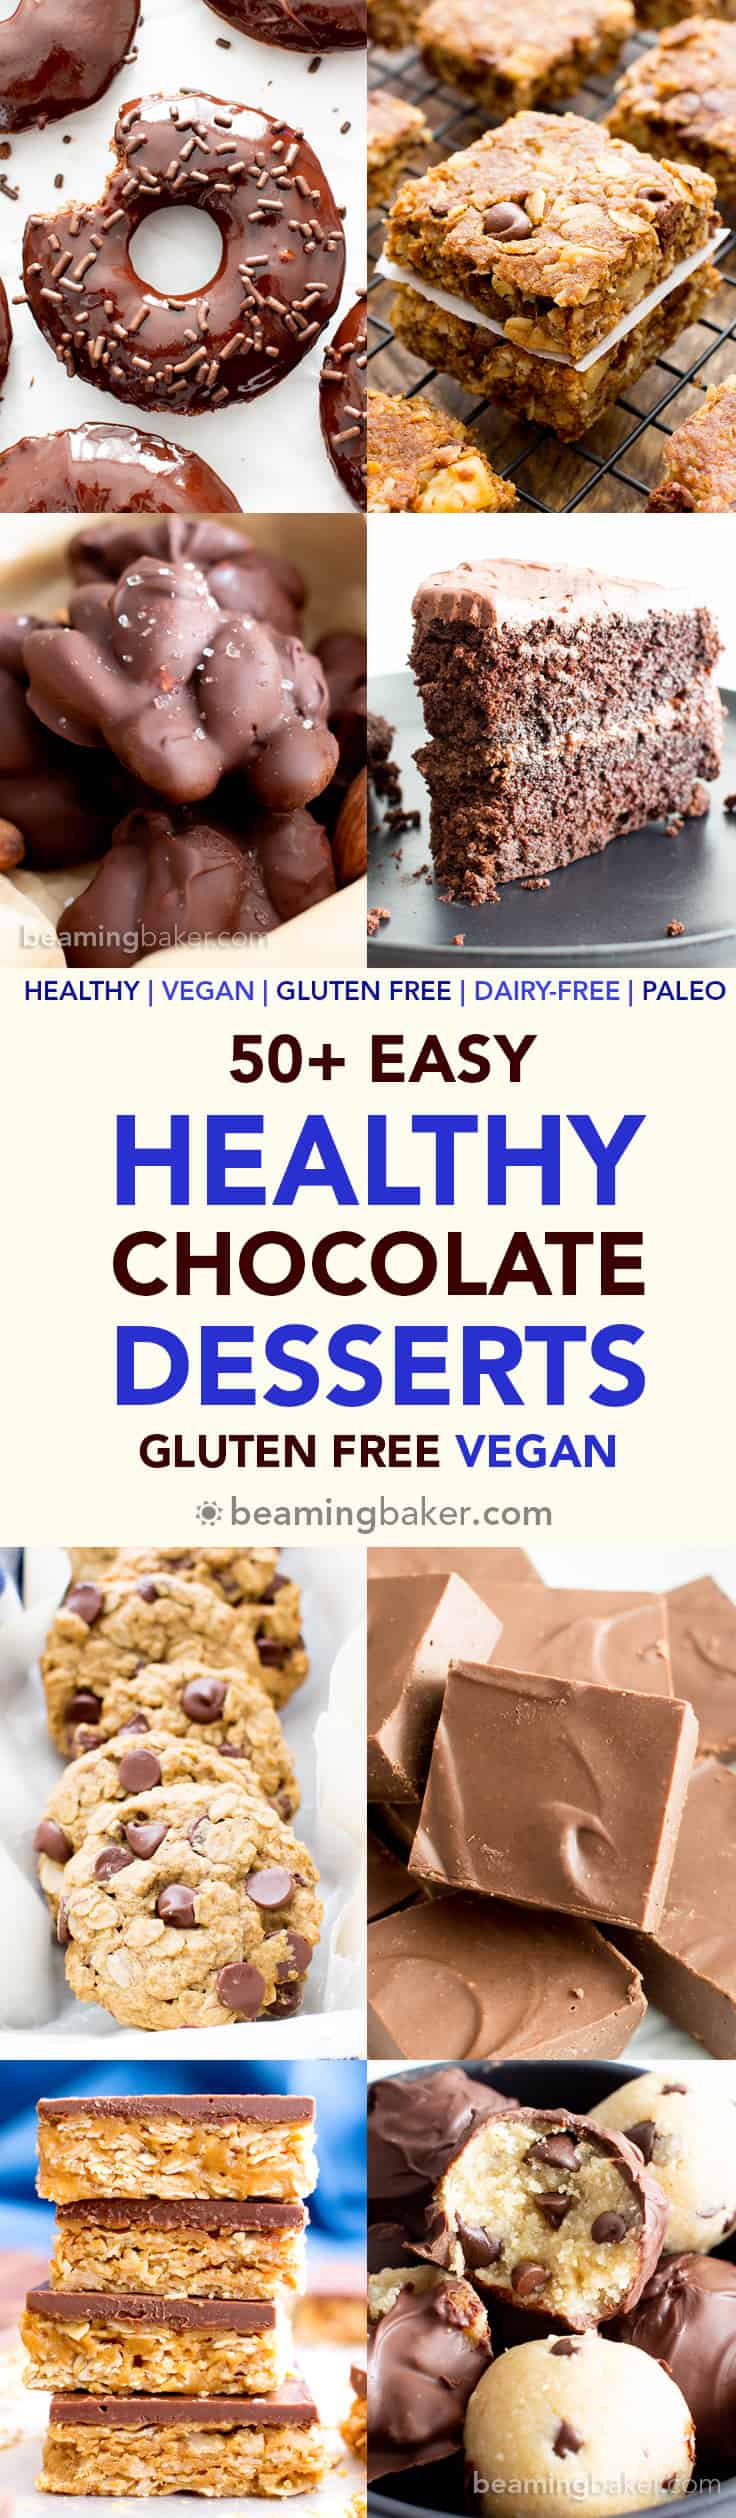 50+ Healthy Vegan Chocolate Desserts Recipes (V, GF): Over 50 easy chocolate desserts made dairy-free + gluten-free! So many satisfying vegan chocolate treats: cookies, cupcakes, cake, bars, candy and more! #Chocolate #Vegan #Paleo #GlutenFree #Healthy #Desserts | Recipes at BeamingBaker.com